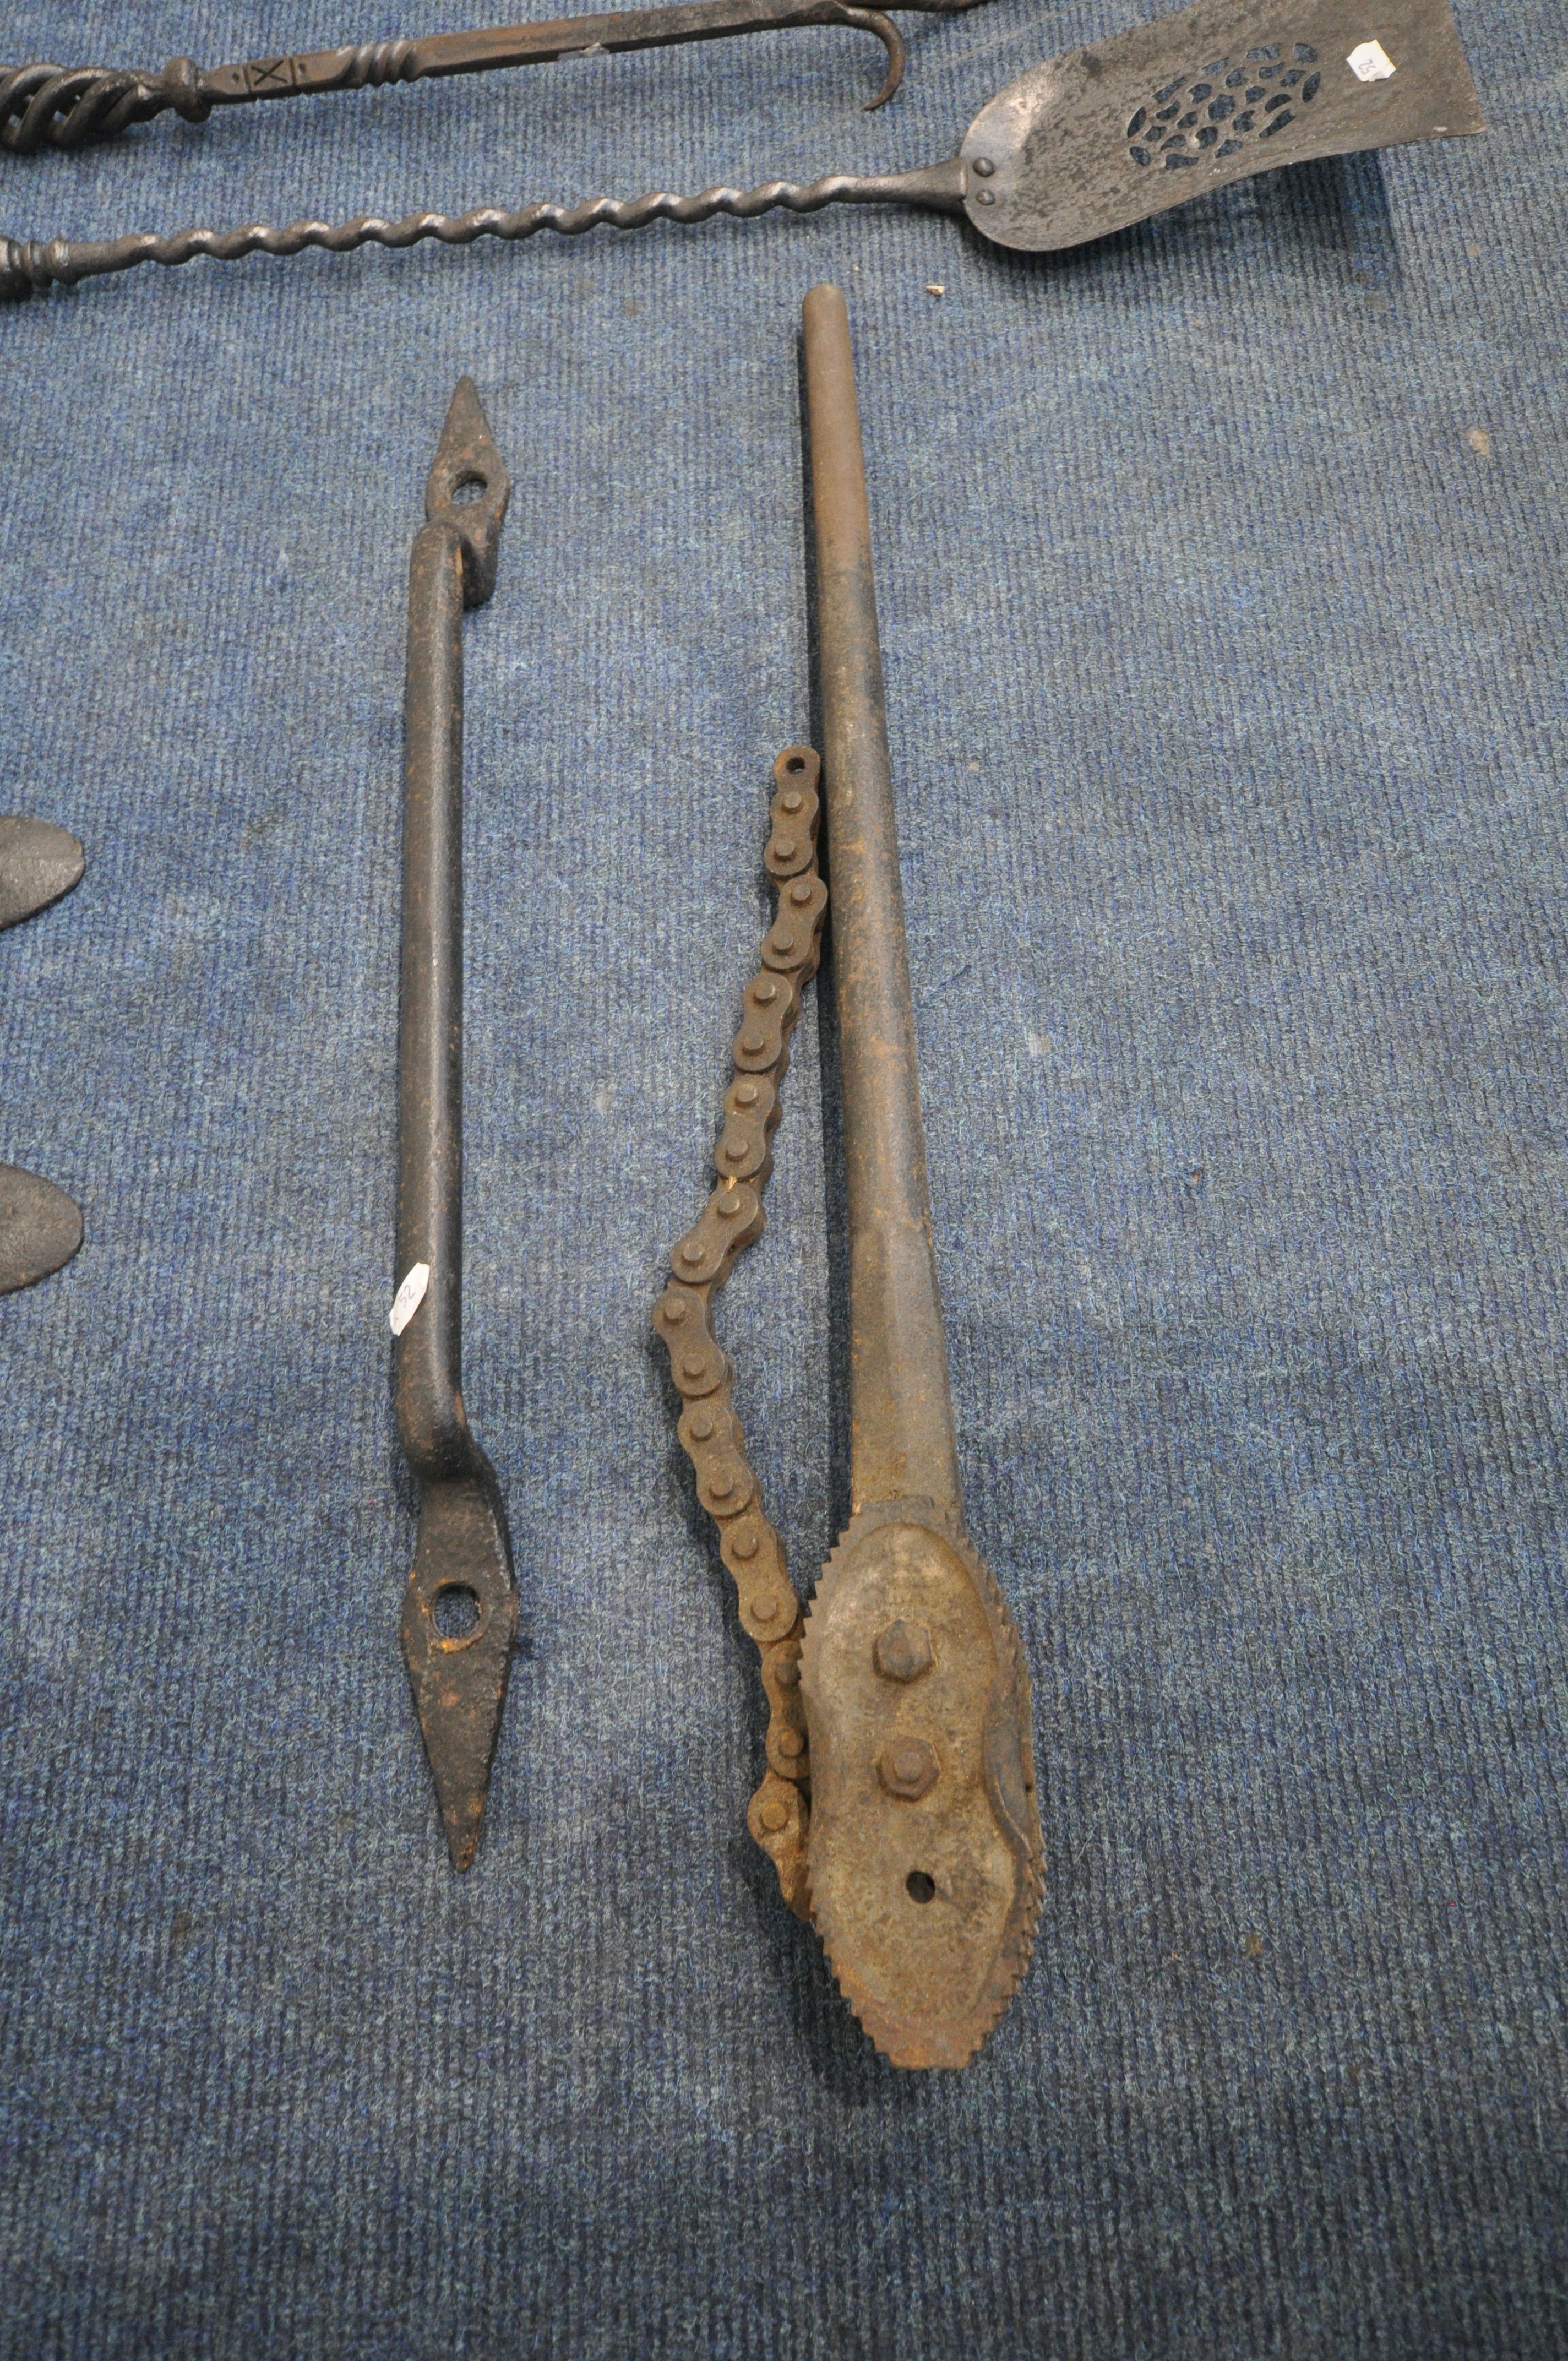 A PAIR OF VICTORIAN CAST IRON ANTI CLIMB SPIKES, a door handle, a chain pipe wrench, along with four - Image 3 of 4